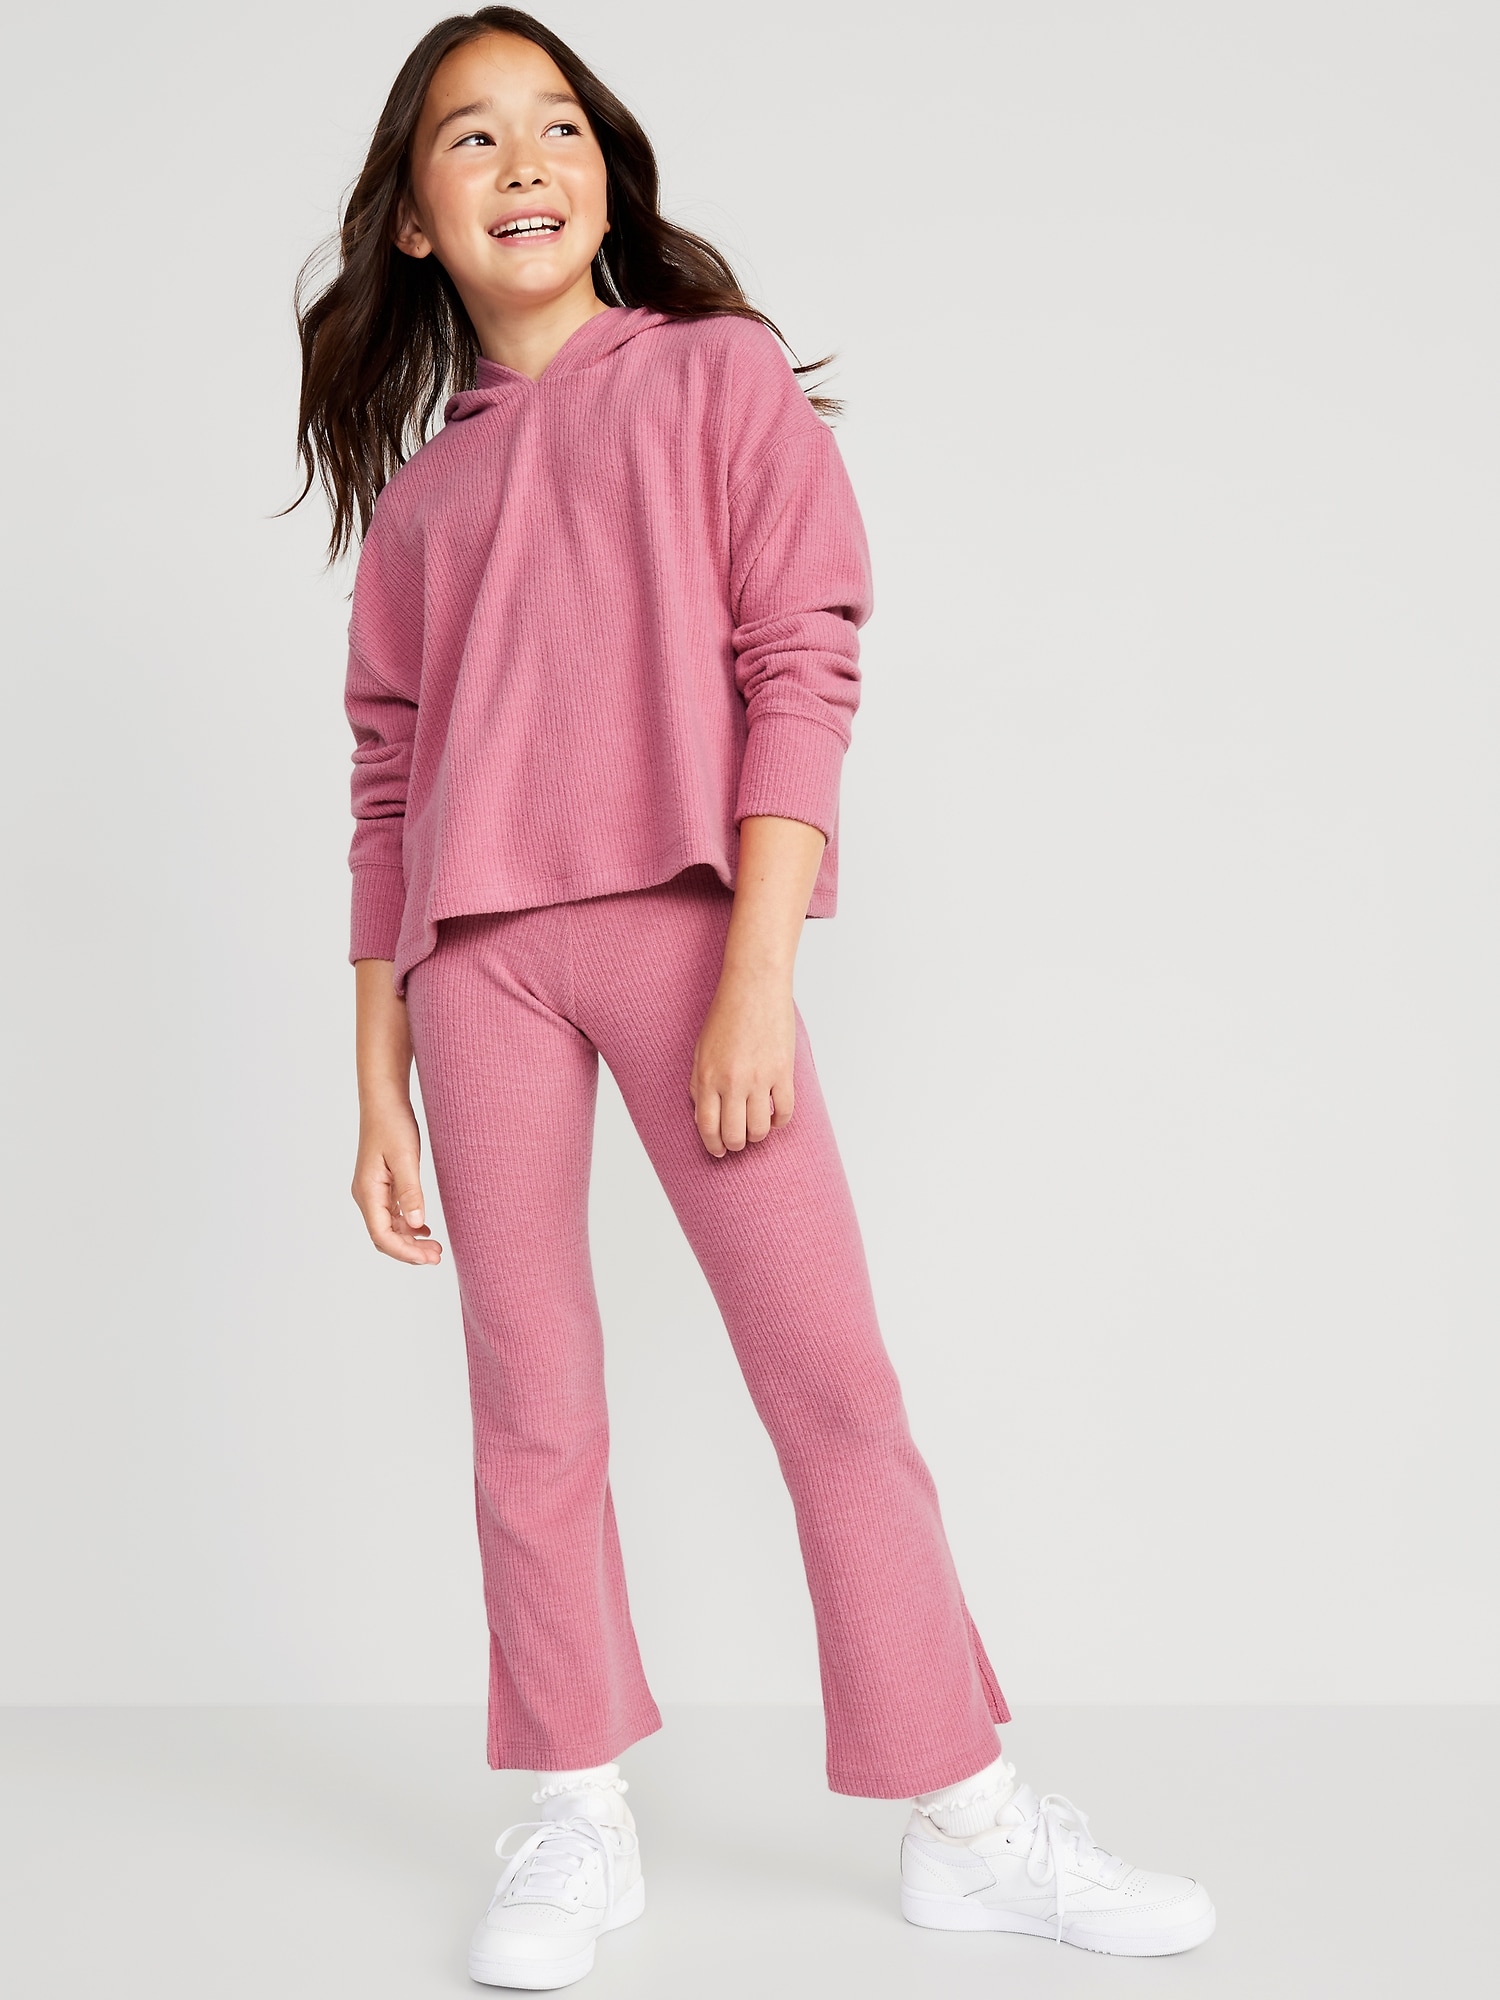 girls cozy flare sweatpants  girls up to 50% off select styles